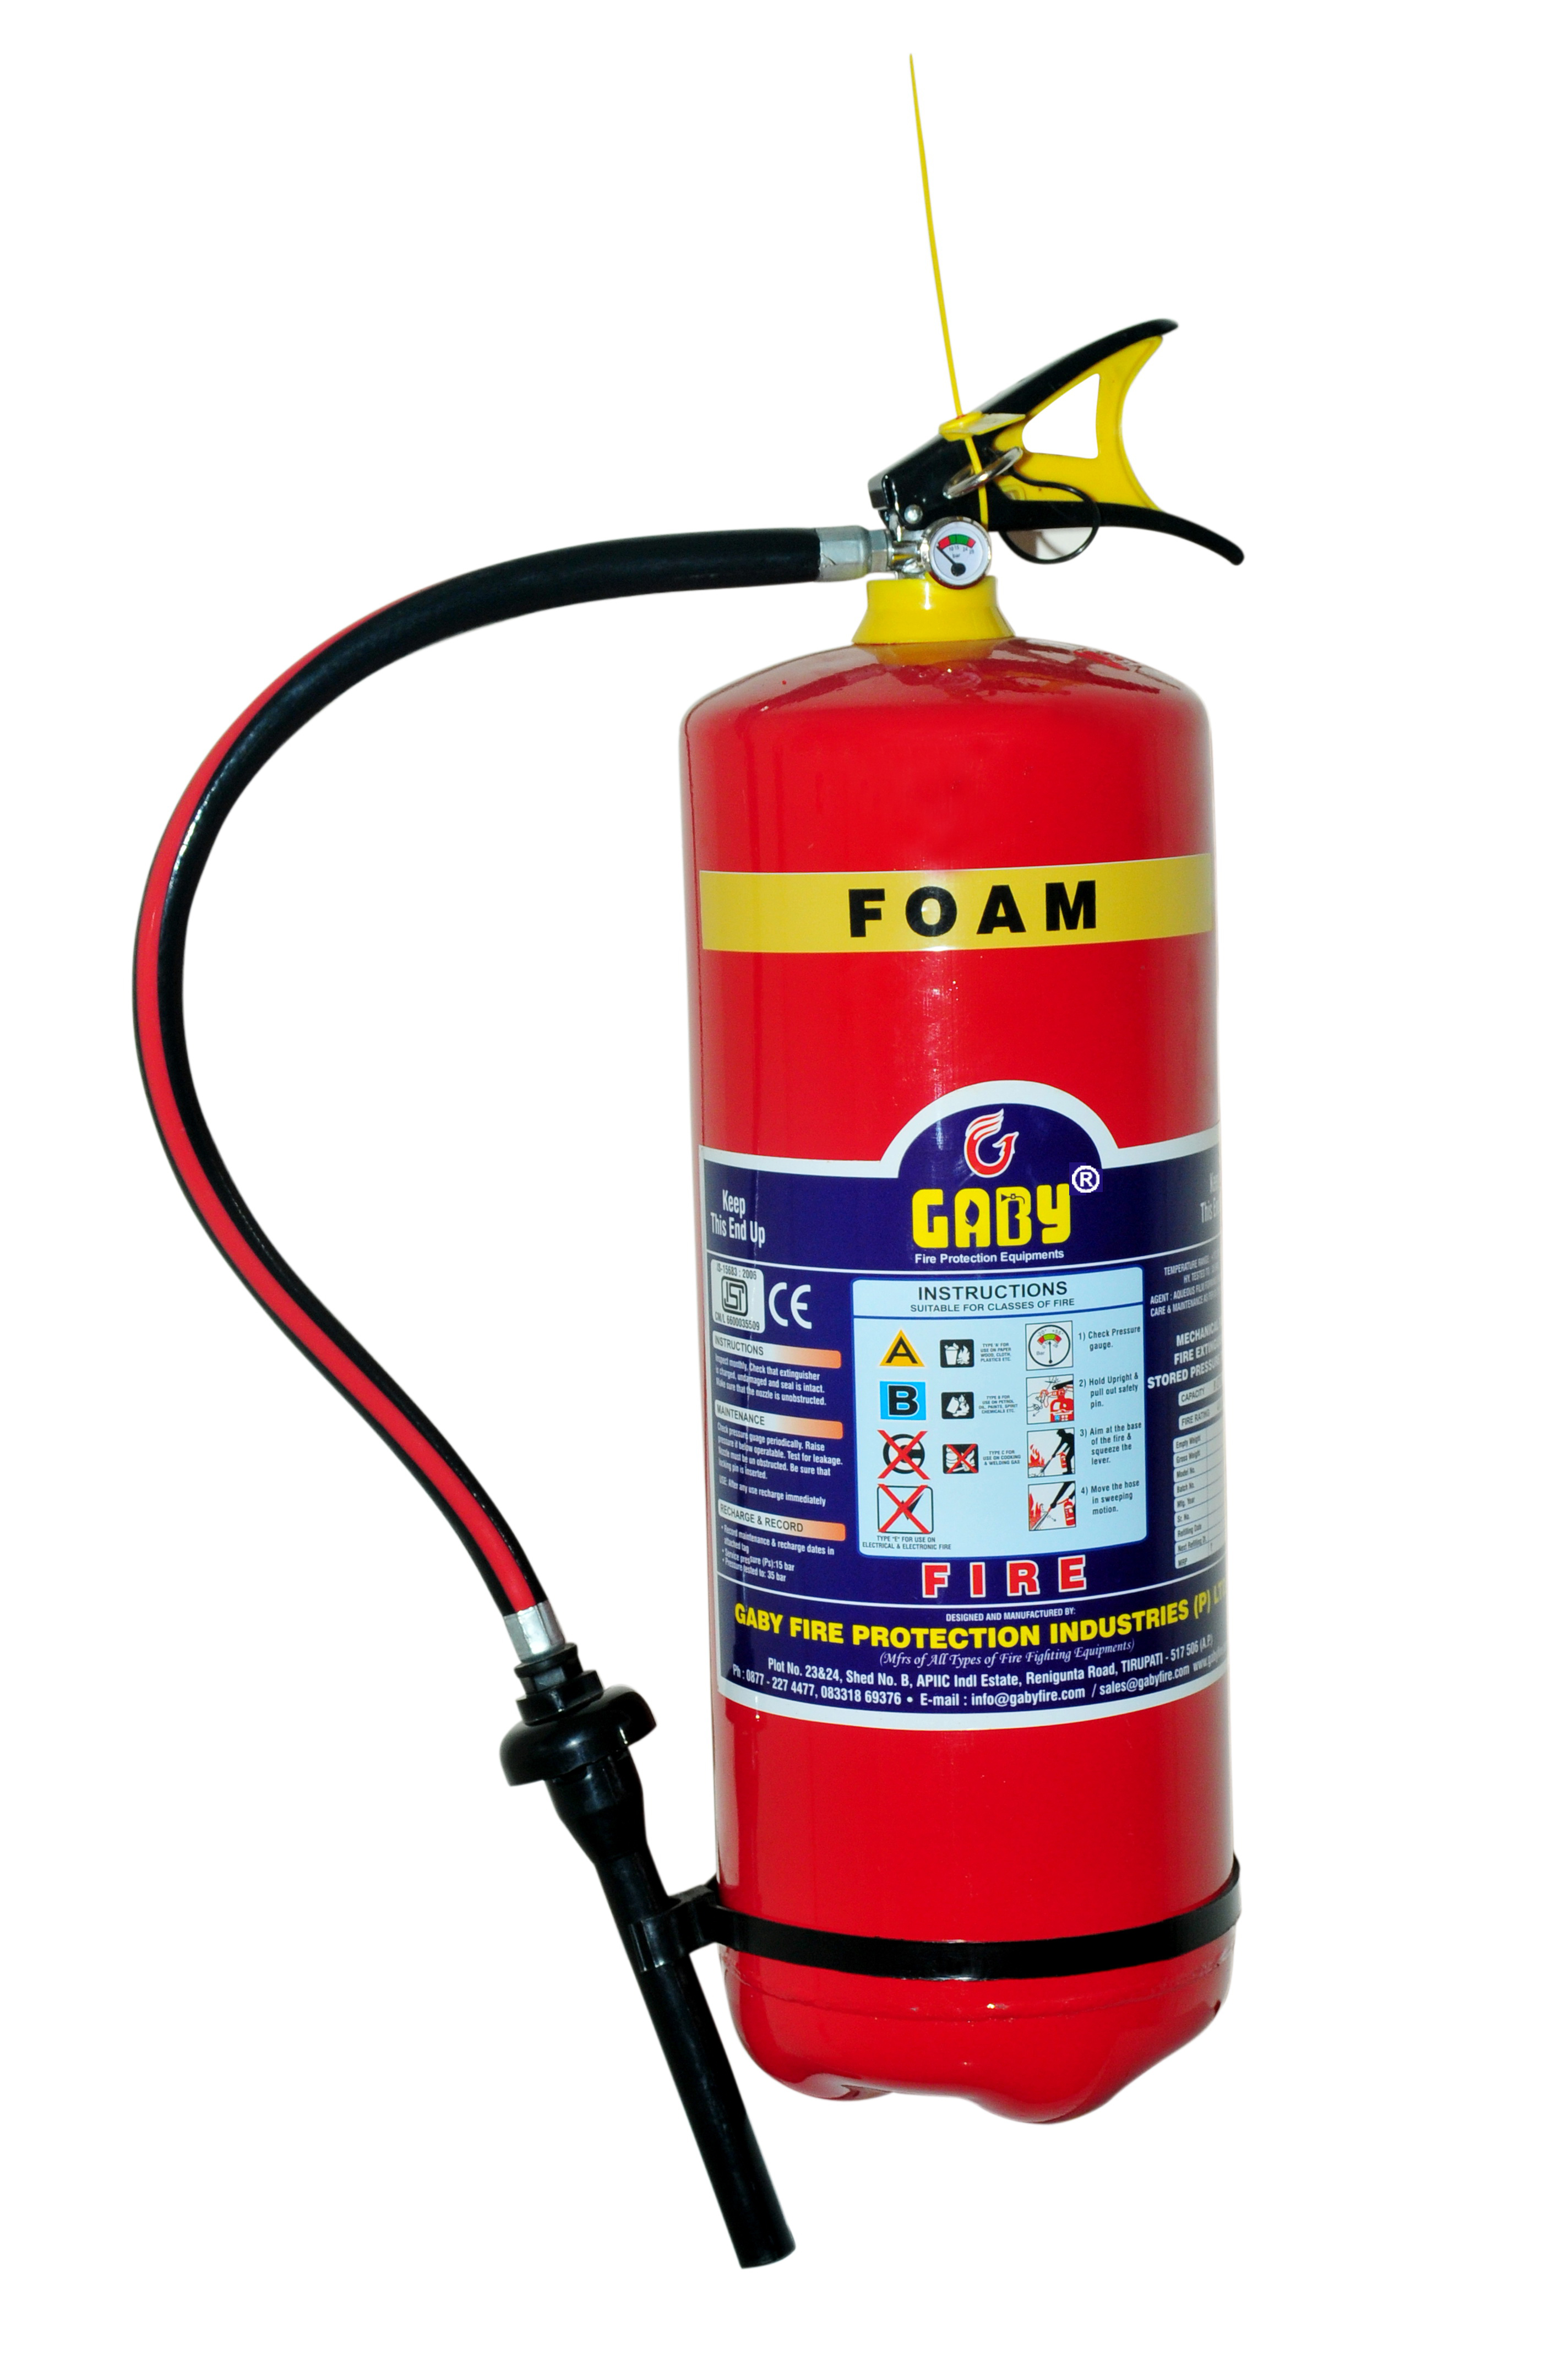 FIRE EXTINGUISHERS MANUFACTURERS, FIRE PROTECTION EQUIPMENTS ,MANUFACTURERS, FIRE PROTECTION EQUIPMENTS SUPPLIERS, FIRE FIGHTING EQUIPMENTS MANUFACTURERS, FIRE FIGHTING EQUIPMENTS SUPPLIERS, FIRE EXTINGUISHERS DEALERS